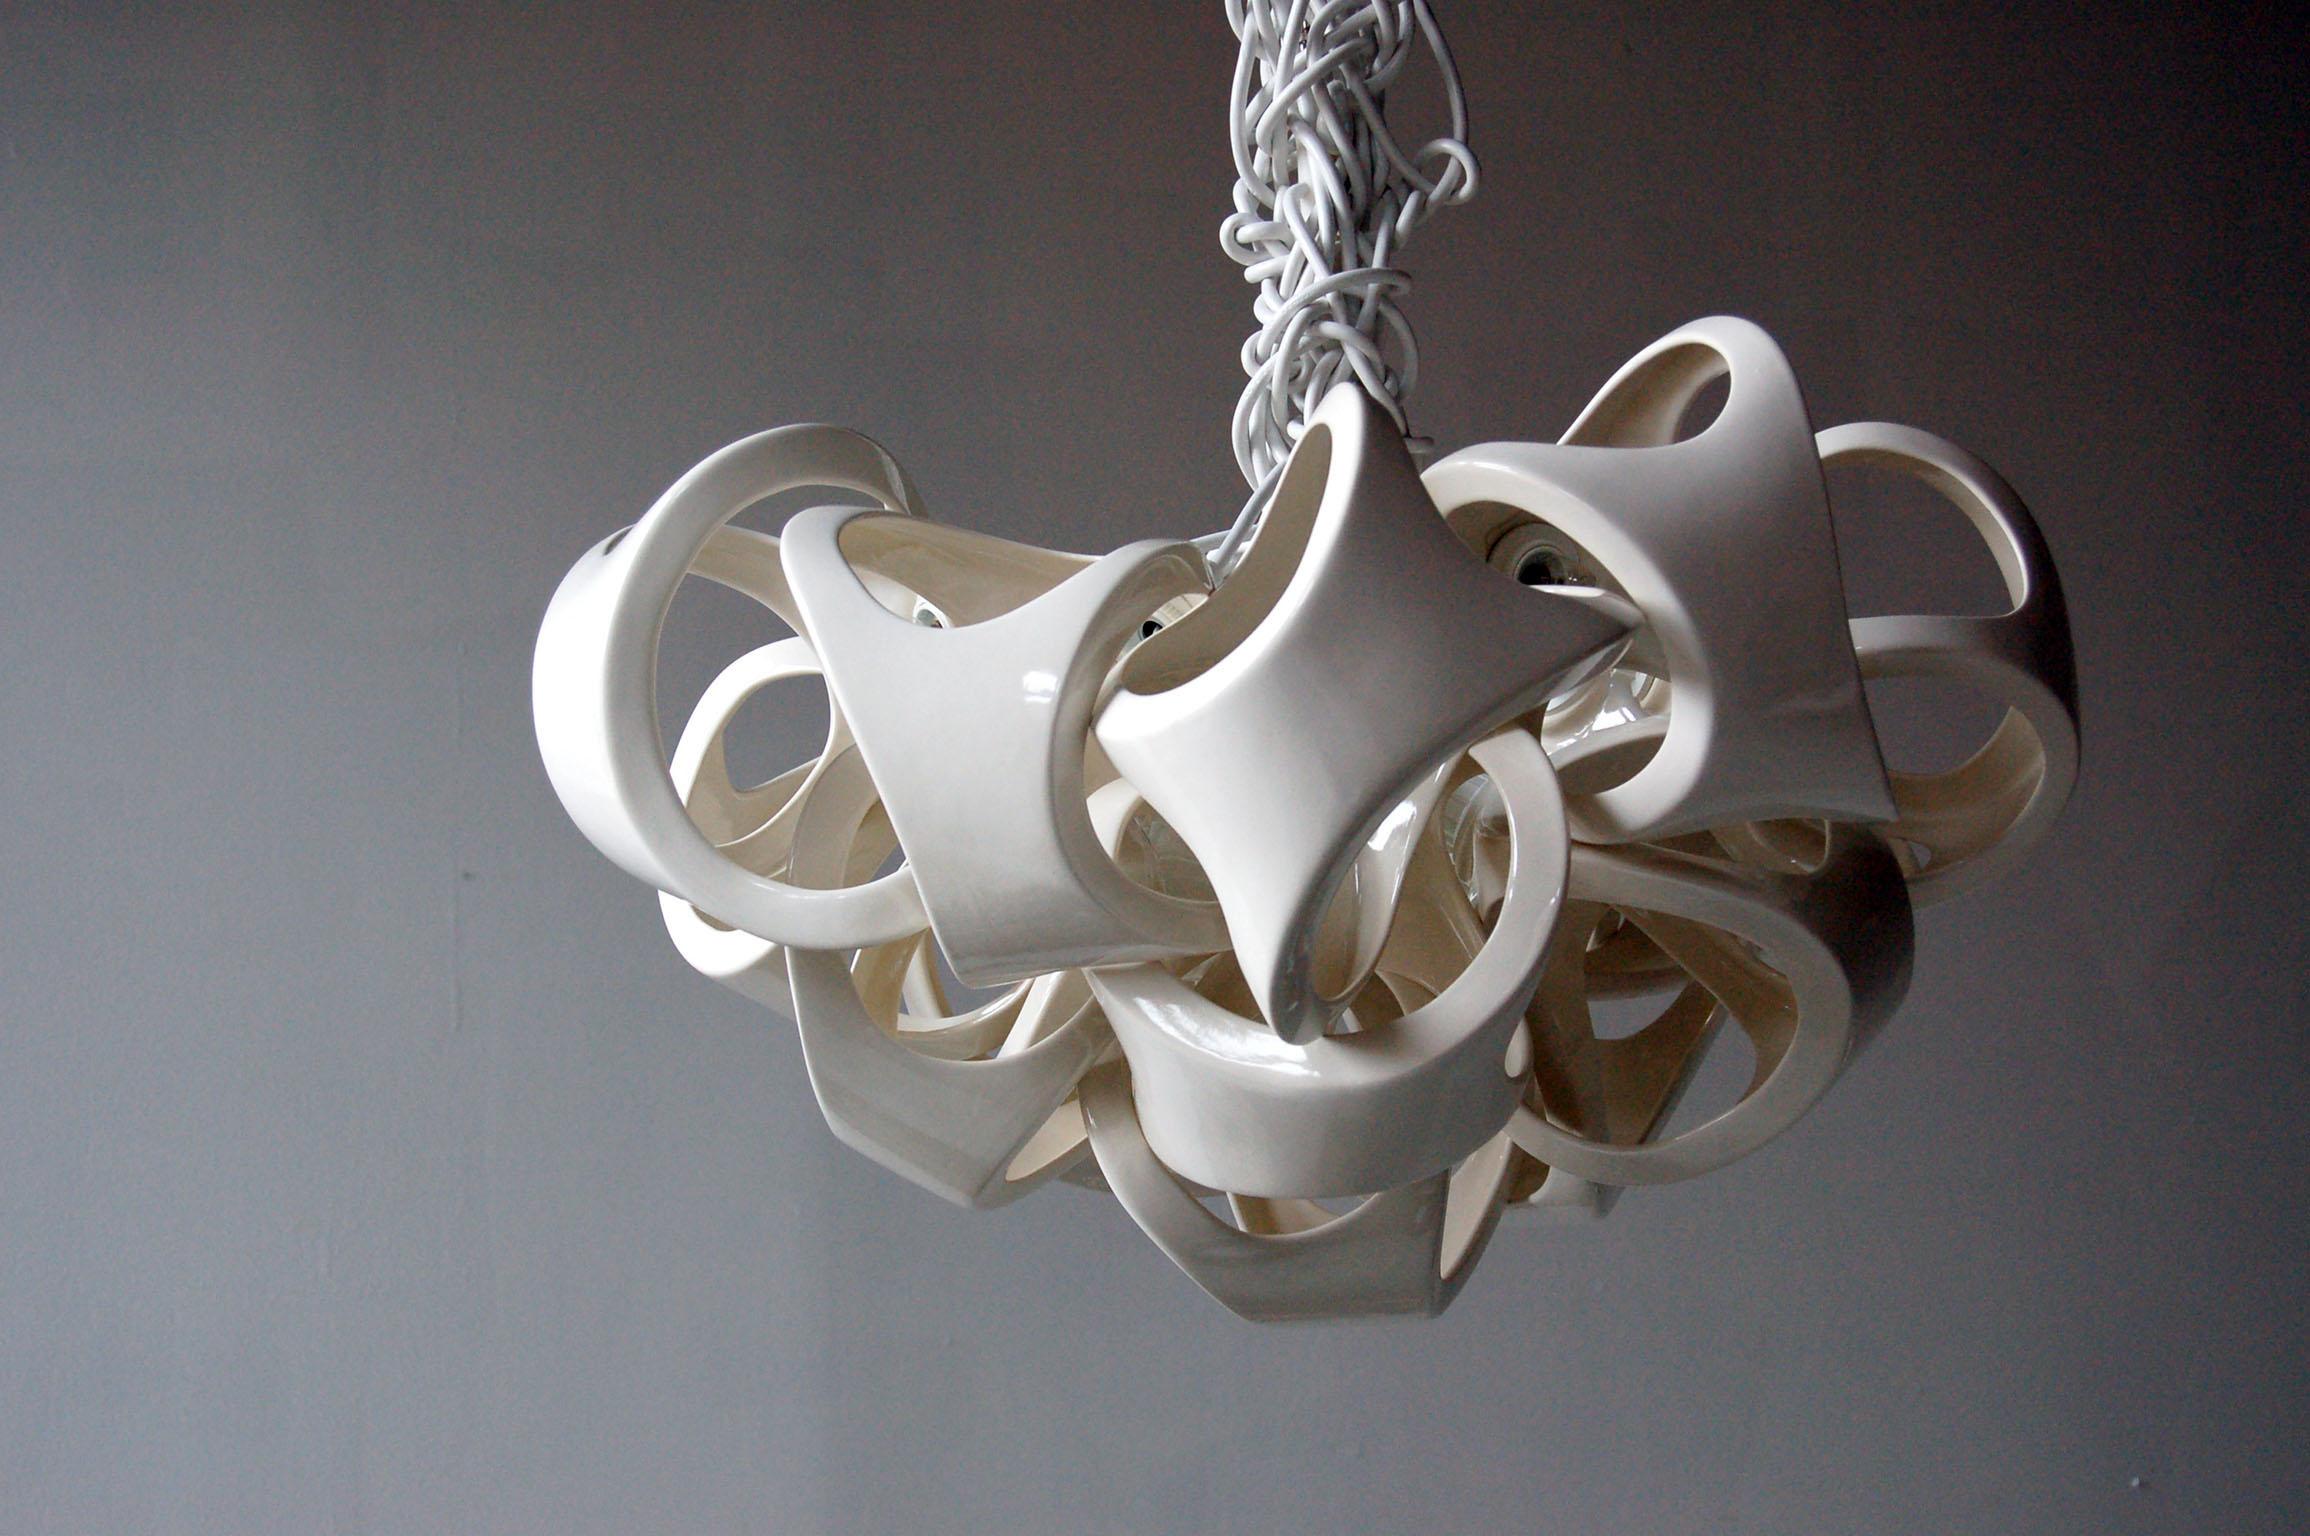 An organic grouping of 15 slip cast ceramic shades. The bone like forms nest together to form a sculptural fixture with dramatic shadows. White knotted cords accentuate the organic nature of the Ceramic lamp series. Overall length of piece can be